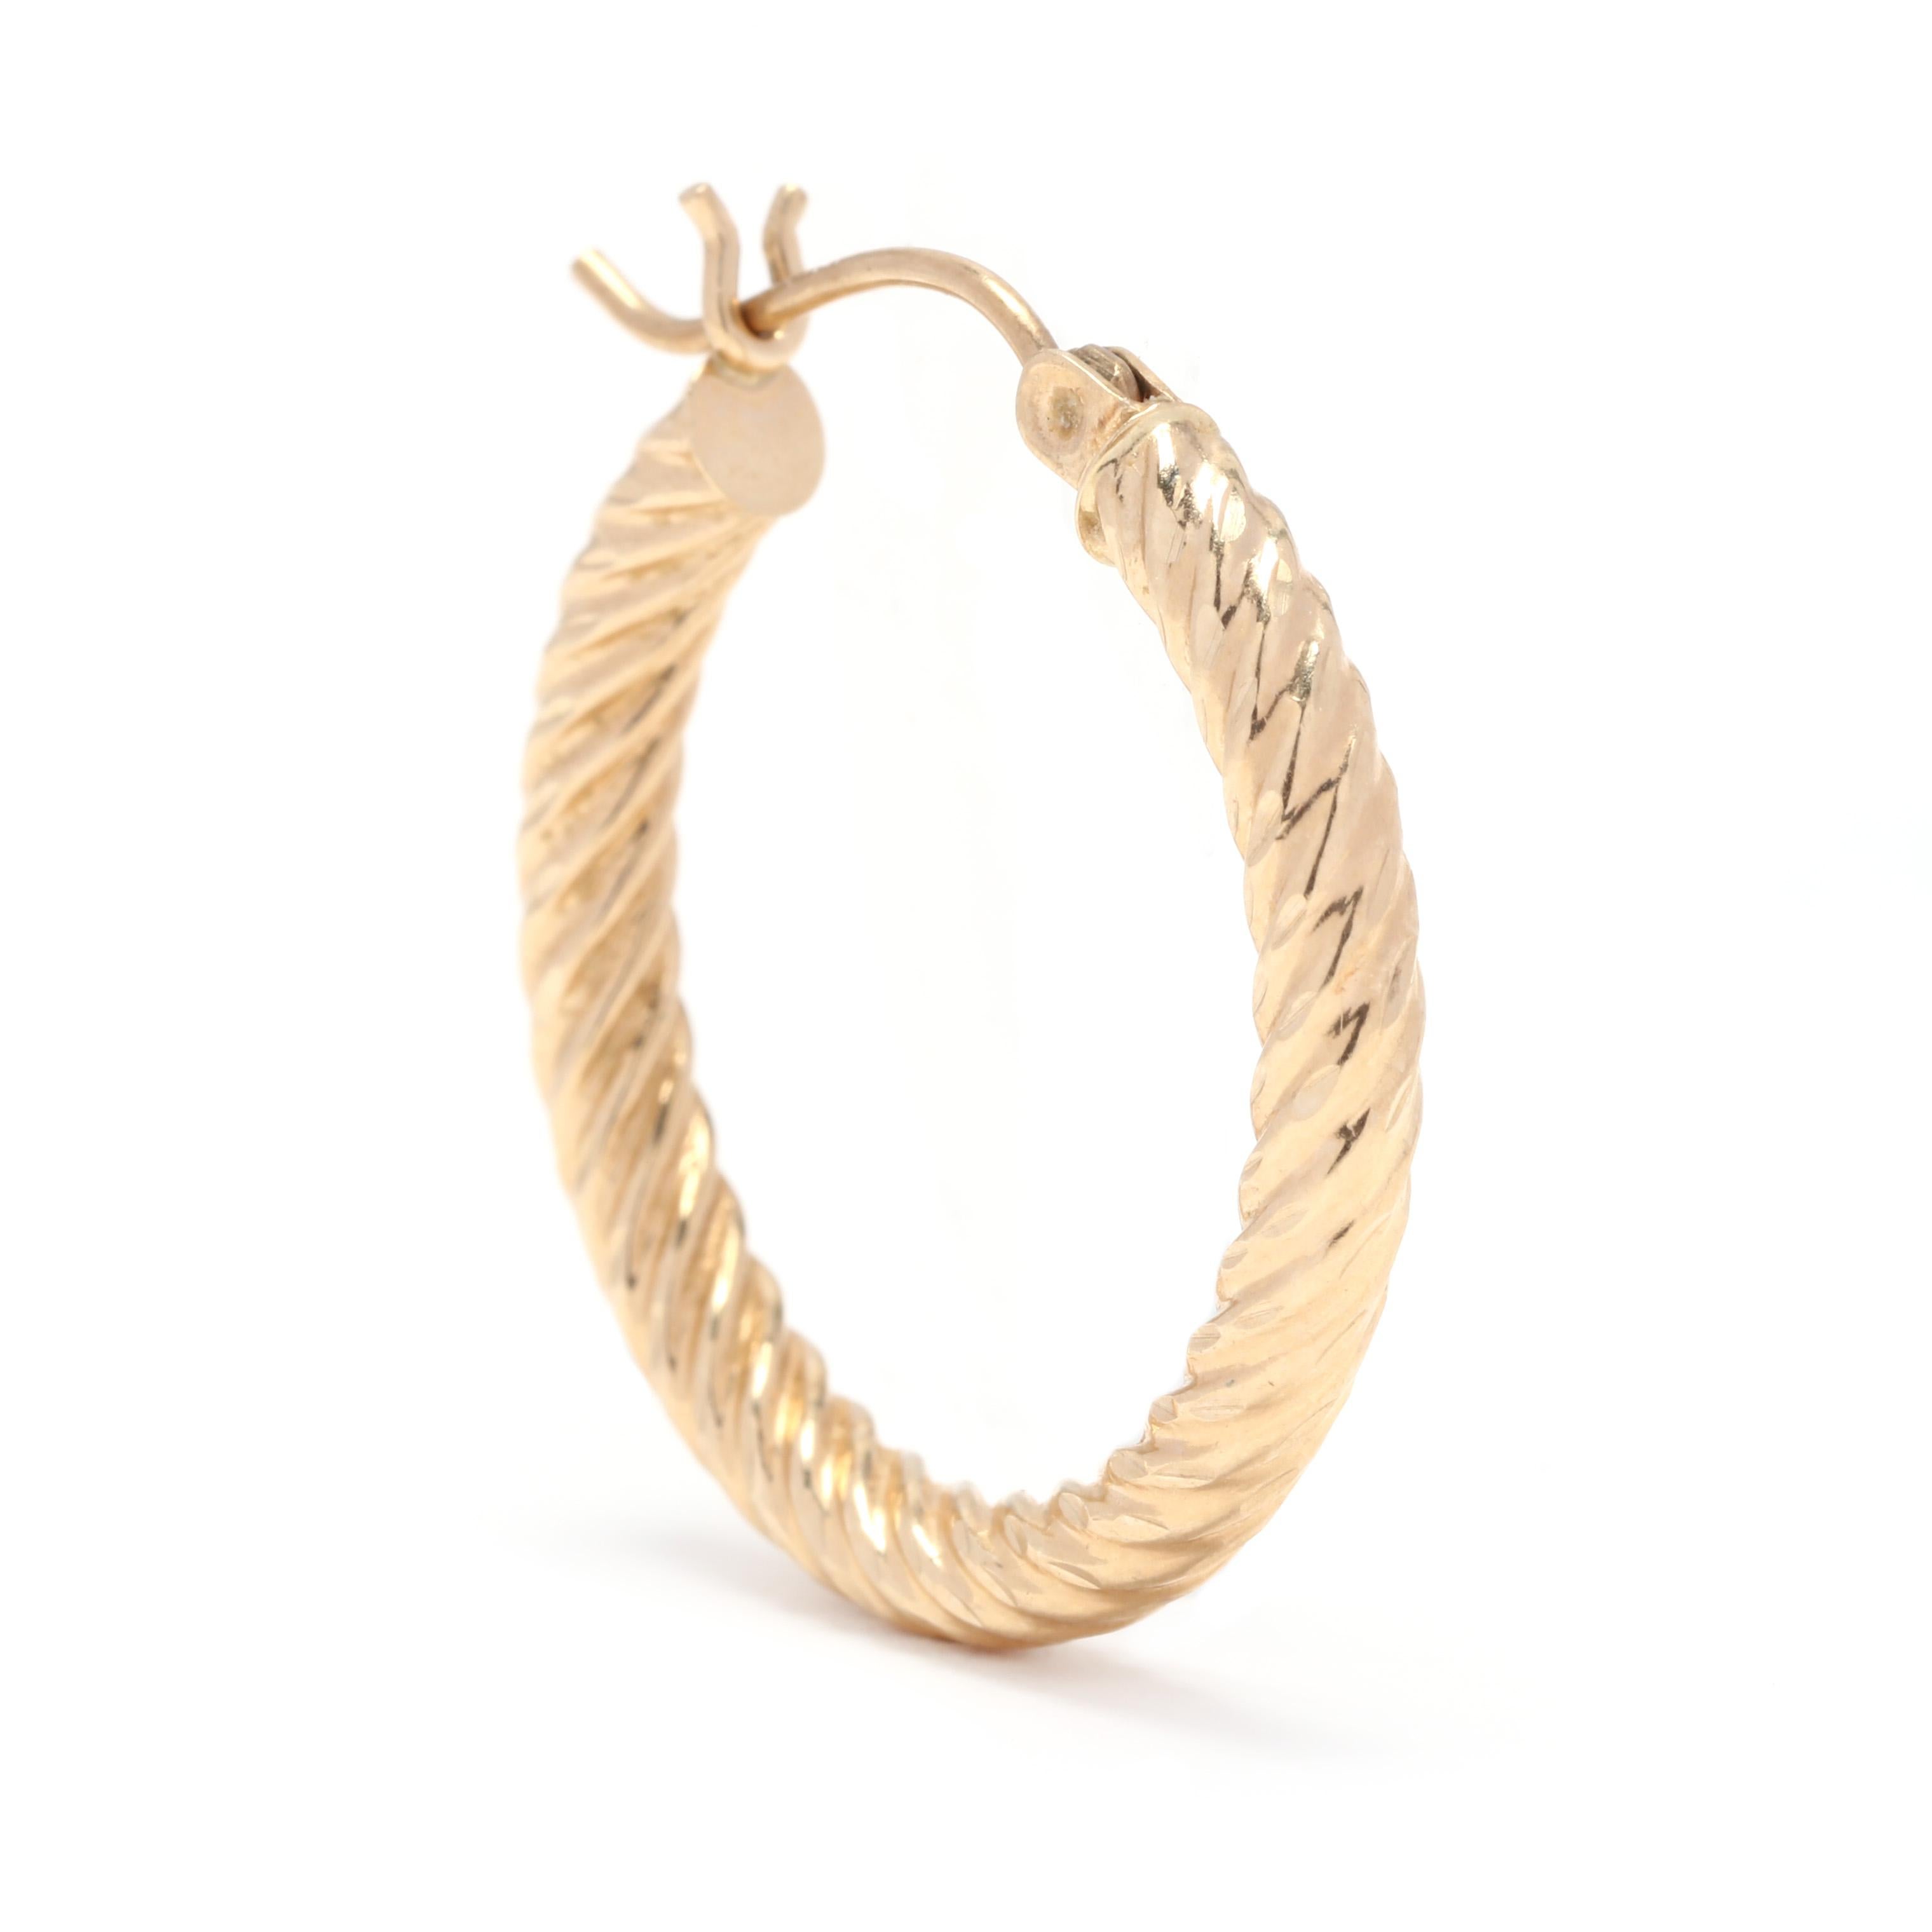 A pair of 10 karat yellow gold twist hoop earrings. These earrings feature a circular, rope twist design with a snap closure.

Length: 7/8 in.

Width: 3 mm

1.1 dwts.

A Couple Of Things to Note:
* This is a vintage item and may show signs of wear.